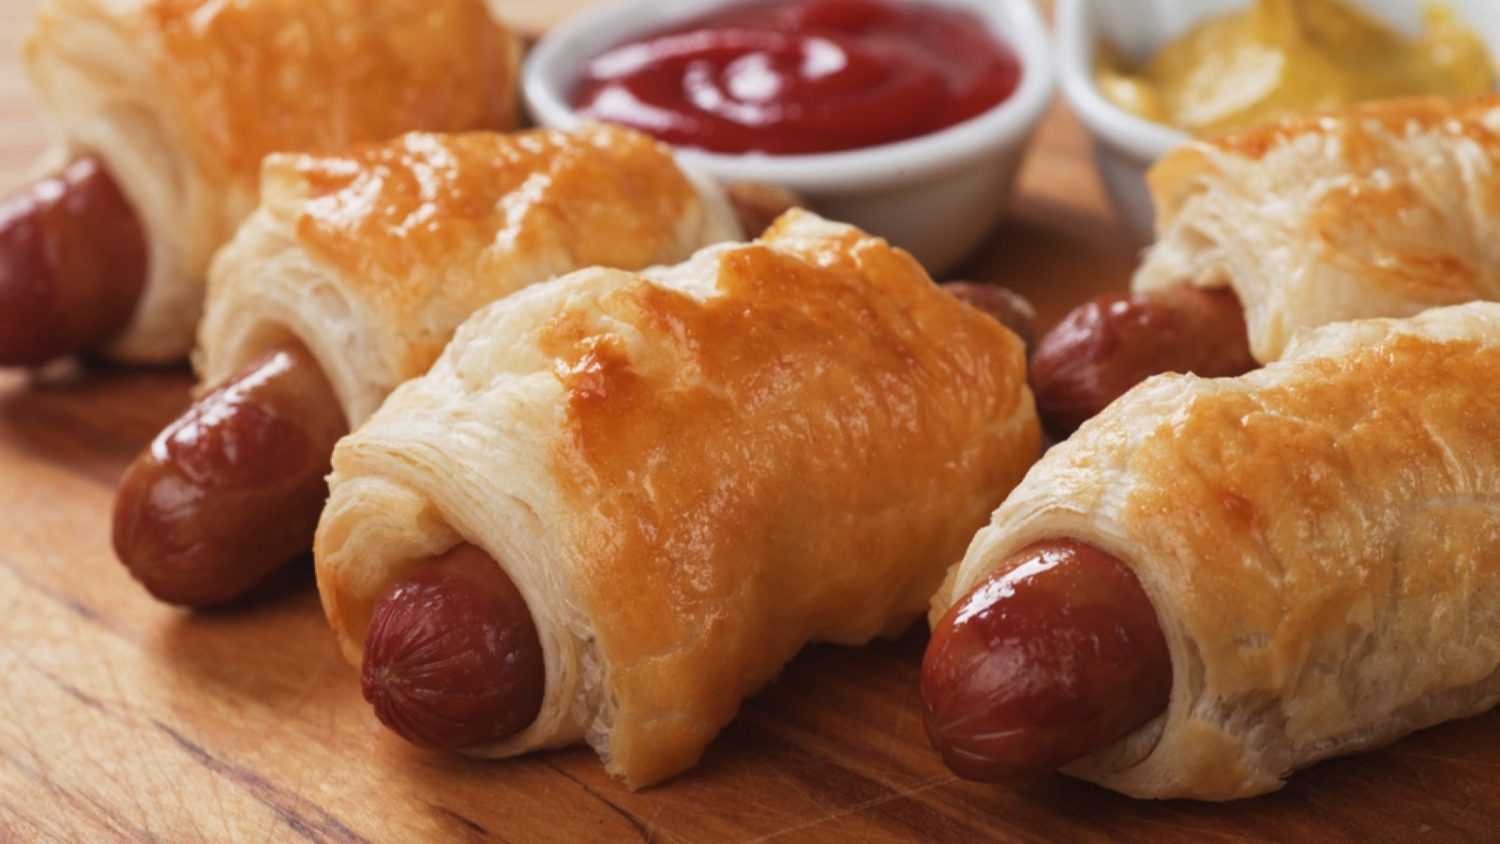 Pigs in blanket, sausage rolls with ketchup and mustard